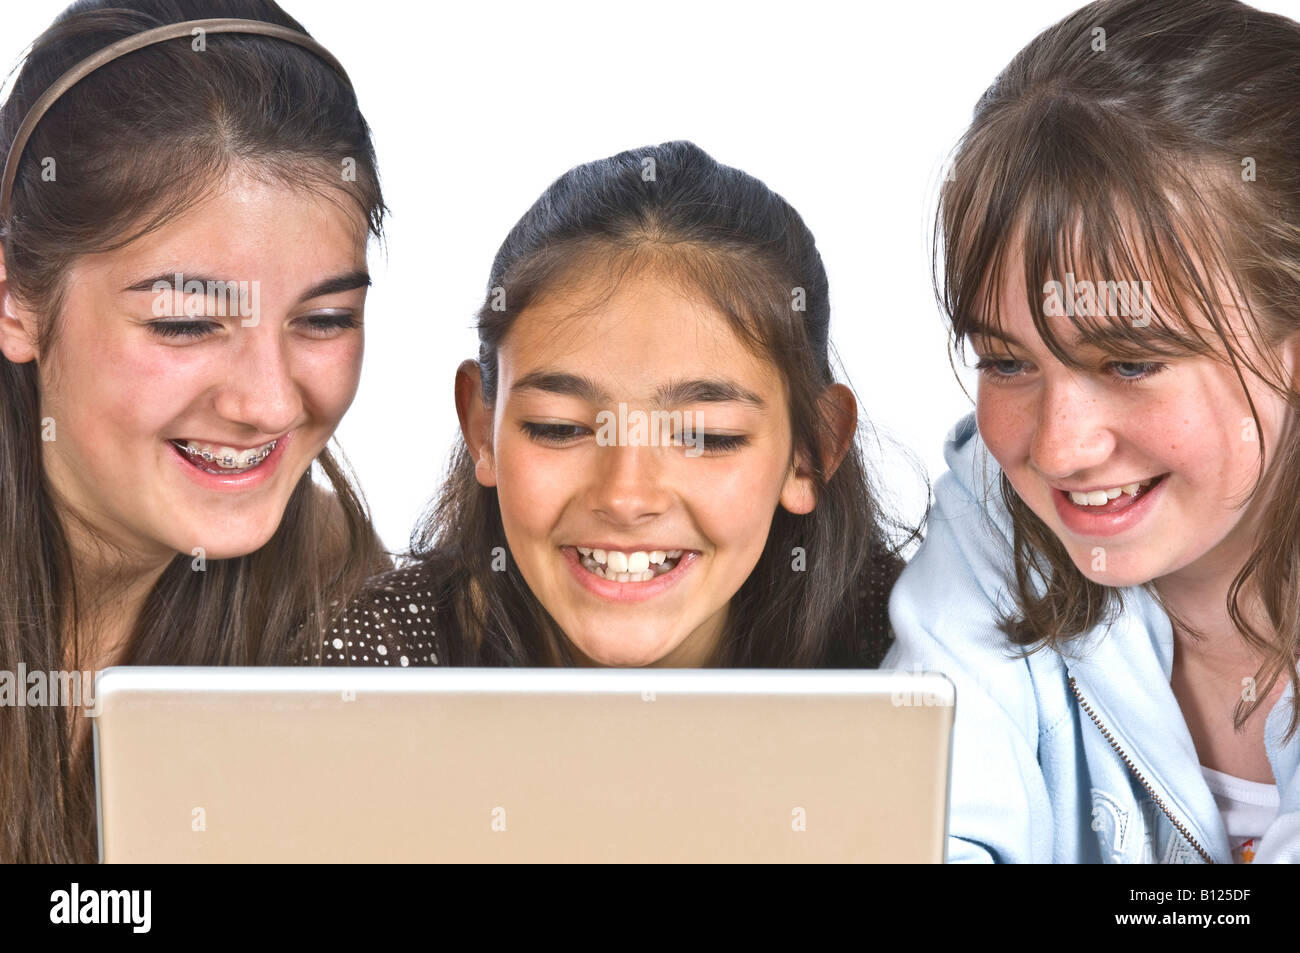 Three young girls (10 - 13 yrs) best friends looking at a lap top computer screen and laughing with one wearing a teeth brace. Stock Photo